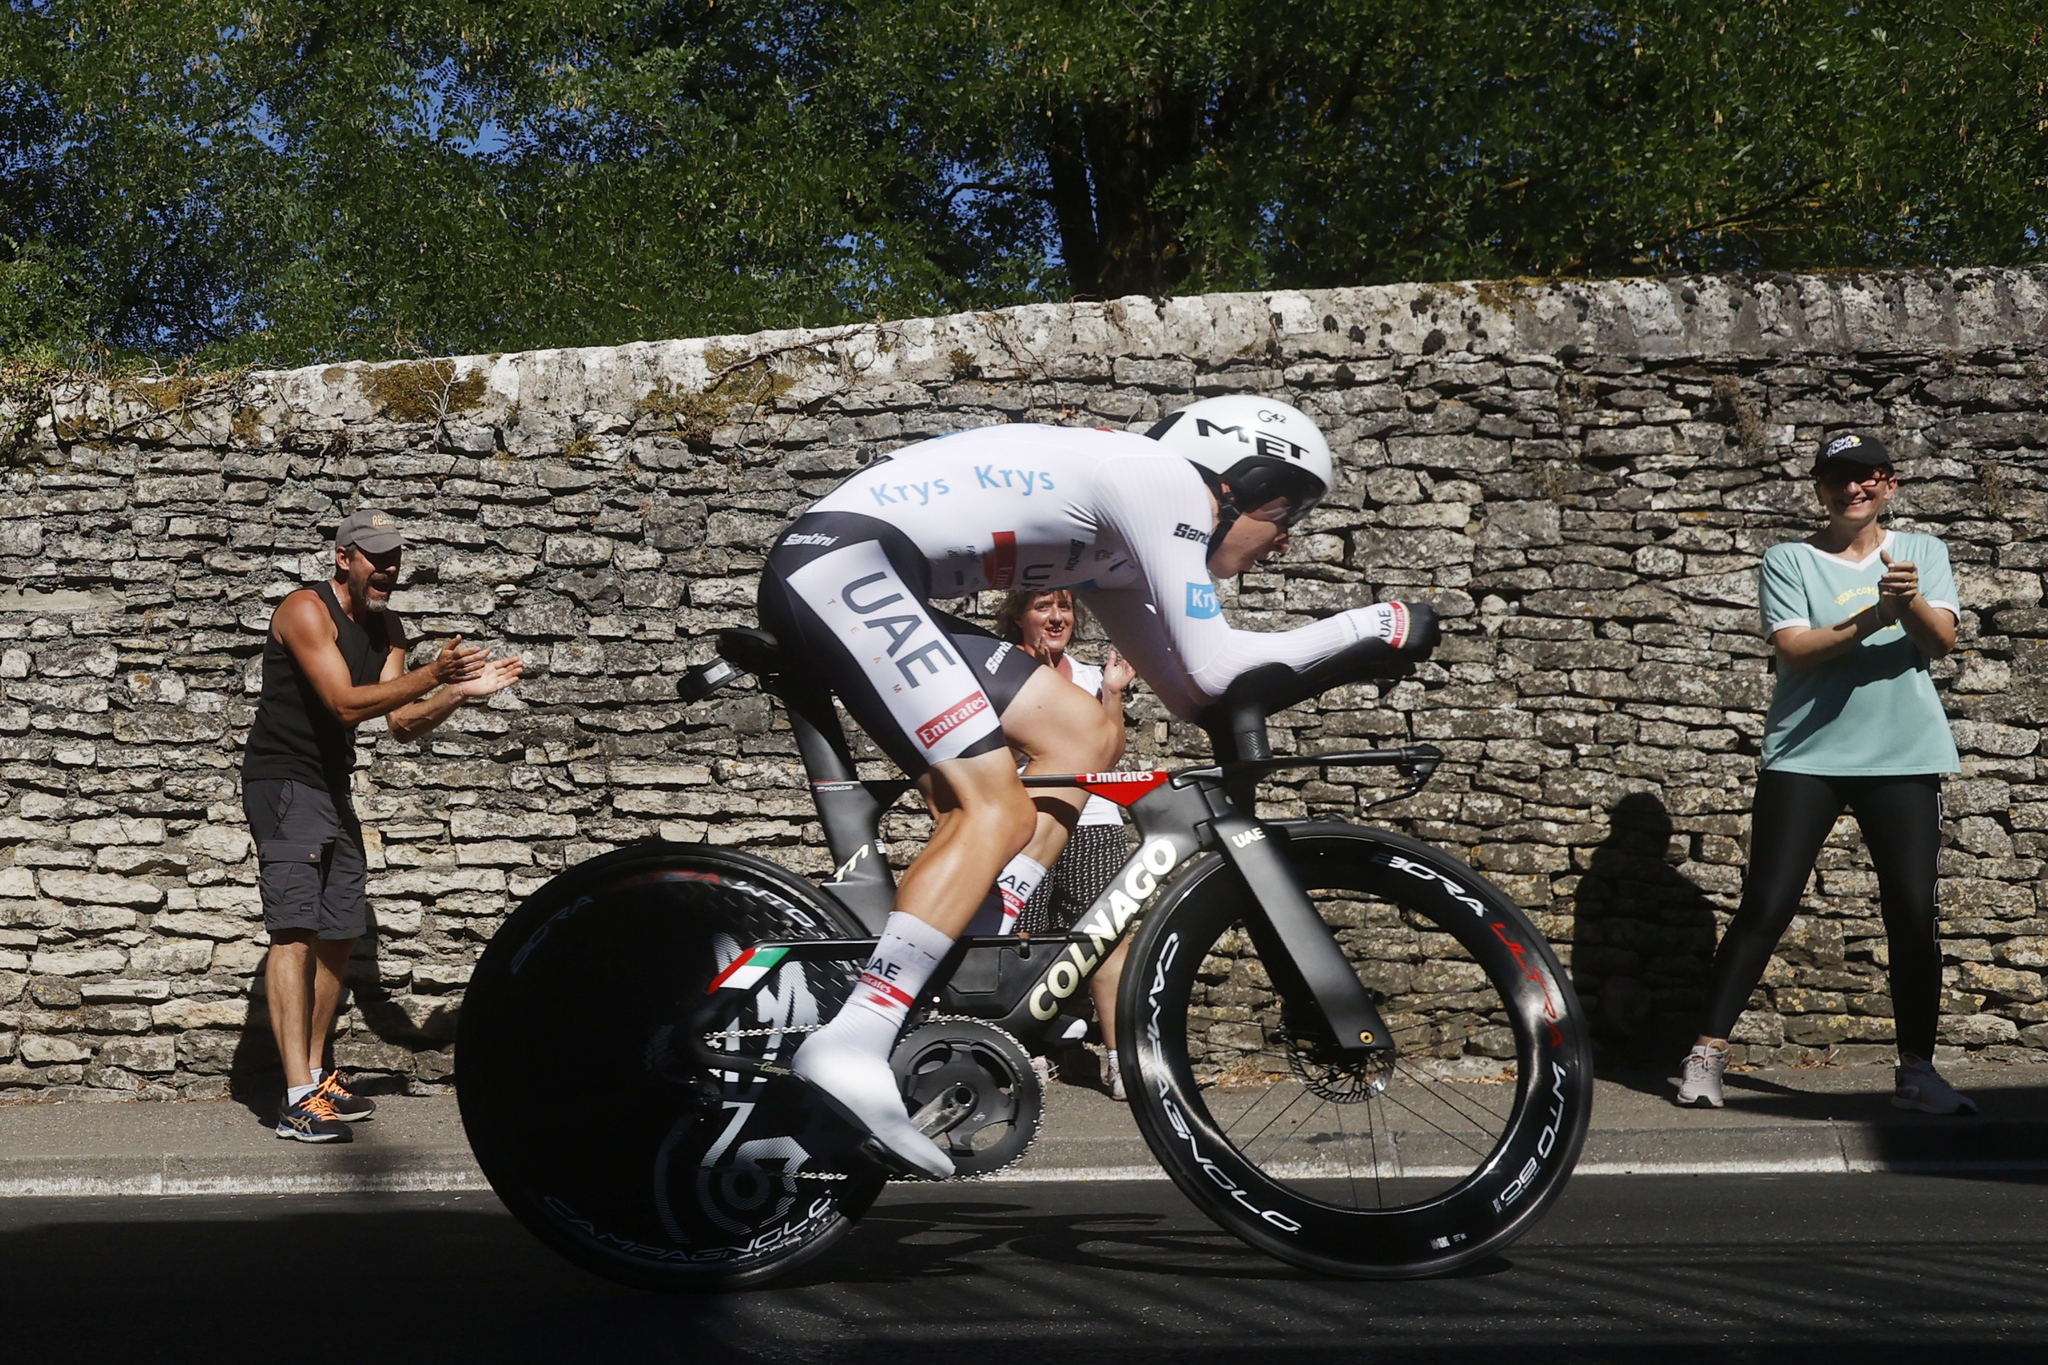 Lacapelle-marival (France), 23/07/2022.- Slovenian rider Tadej  lt;HIT gt;Pogacar lt;/HIT gt; of UAE Team Emirates in action during the 20th stage of the Tour de France 2022, an individual time trial over 40.7km from Lacapelle-Marival to Rocamadour, France, 23 July 2022. (Ciclismo, Francia, Eslovenia) EFE/EPA/YOAN VALAT